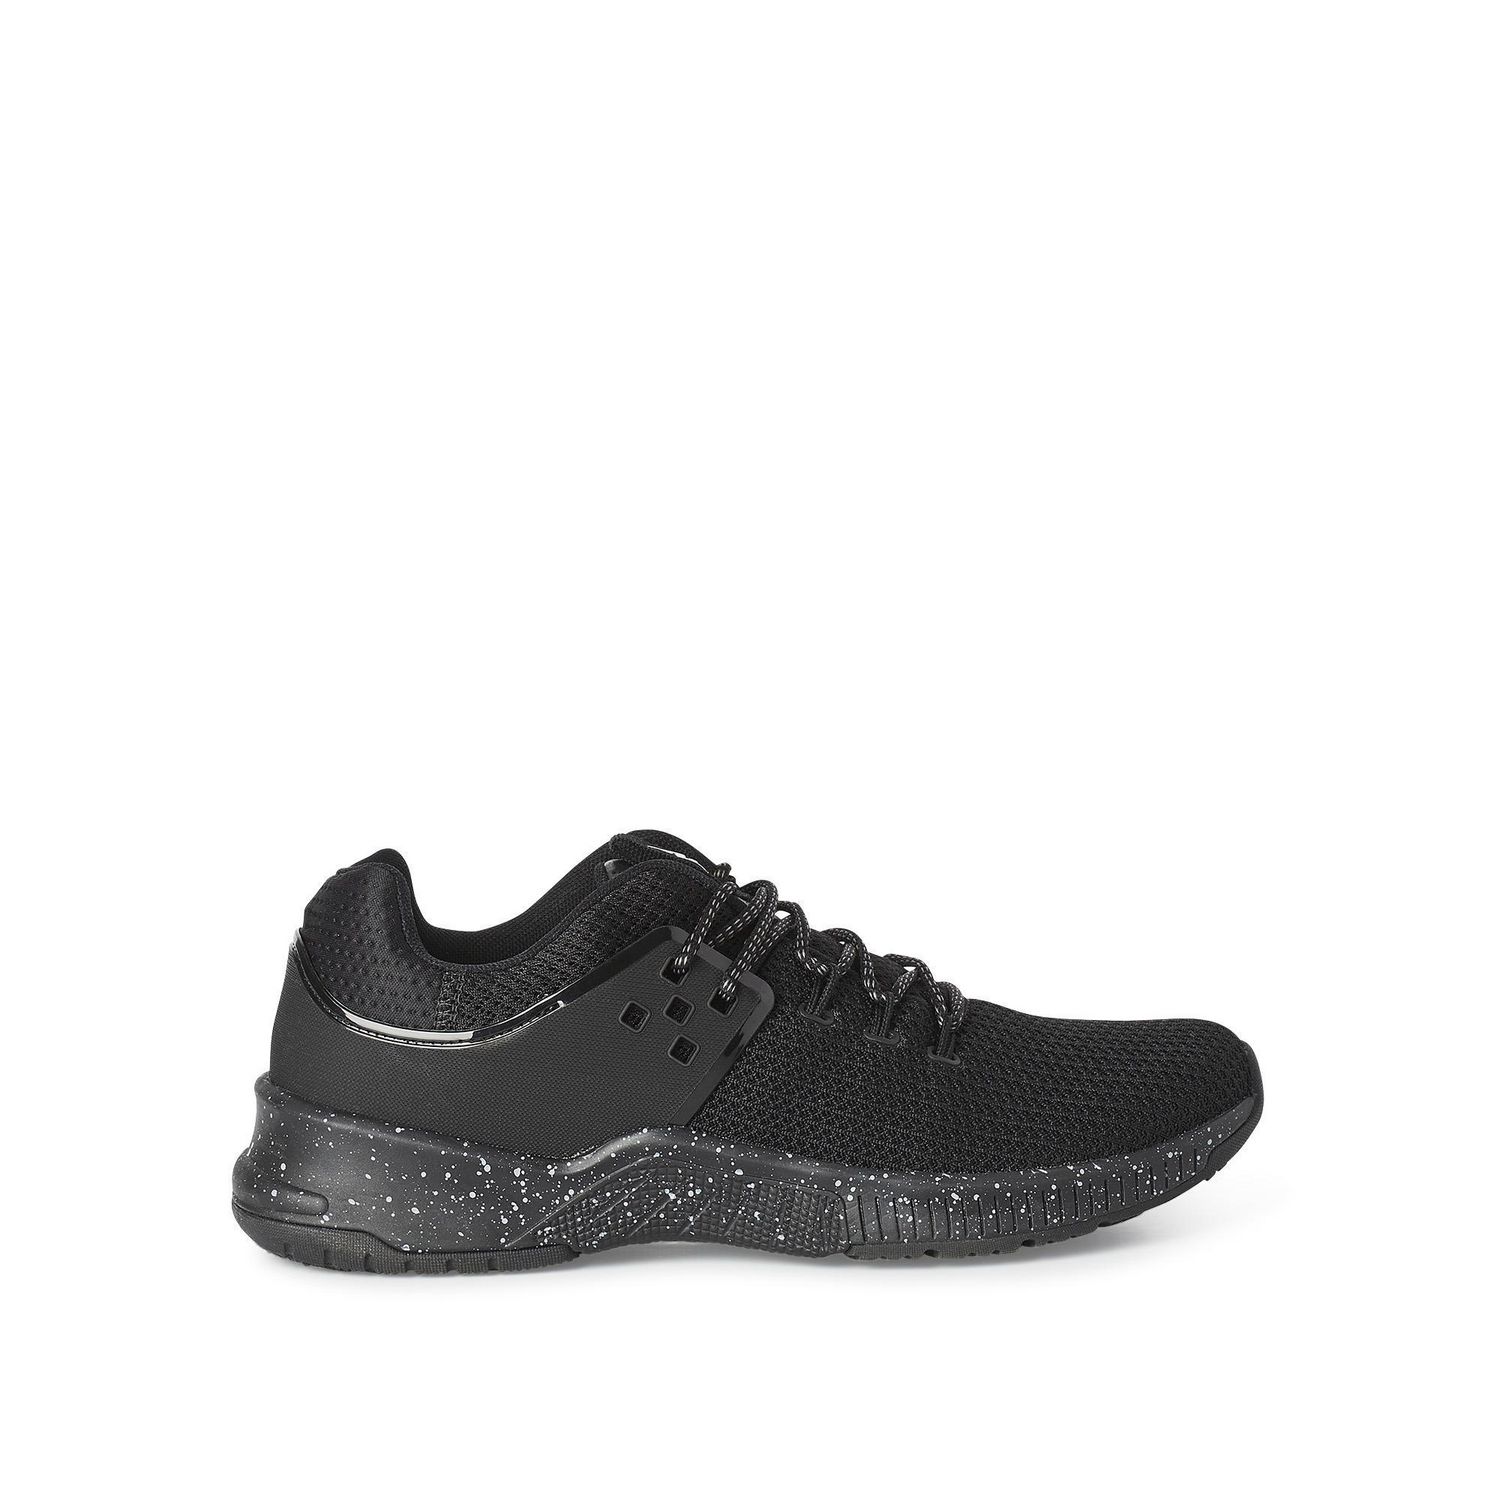 Athletic Works Men's Rock Running Shoes | Walmart Canada